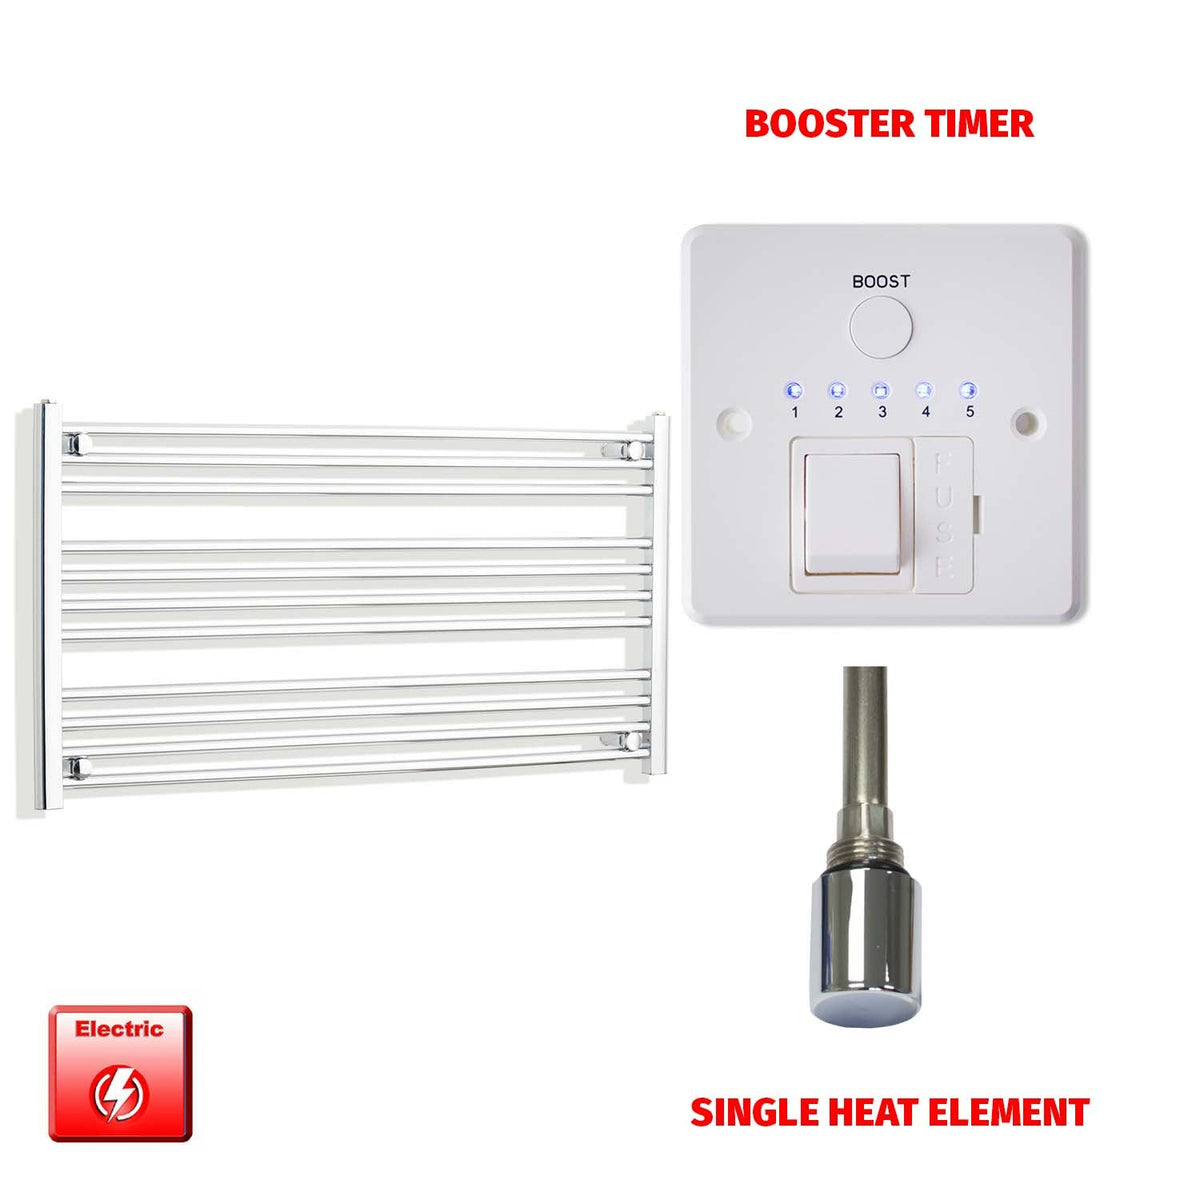 600mm High 950mm Wide Pre-Filled Electric Heated Towel Radiator Straight Chrome Single heat element Booster timer